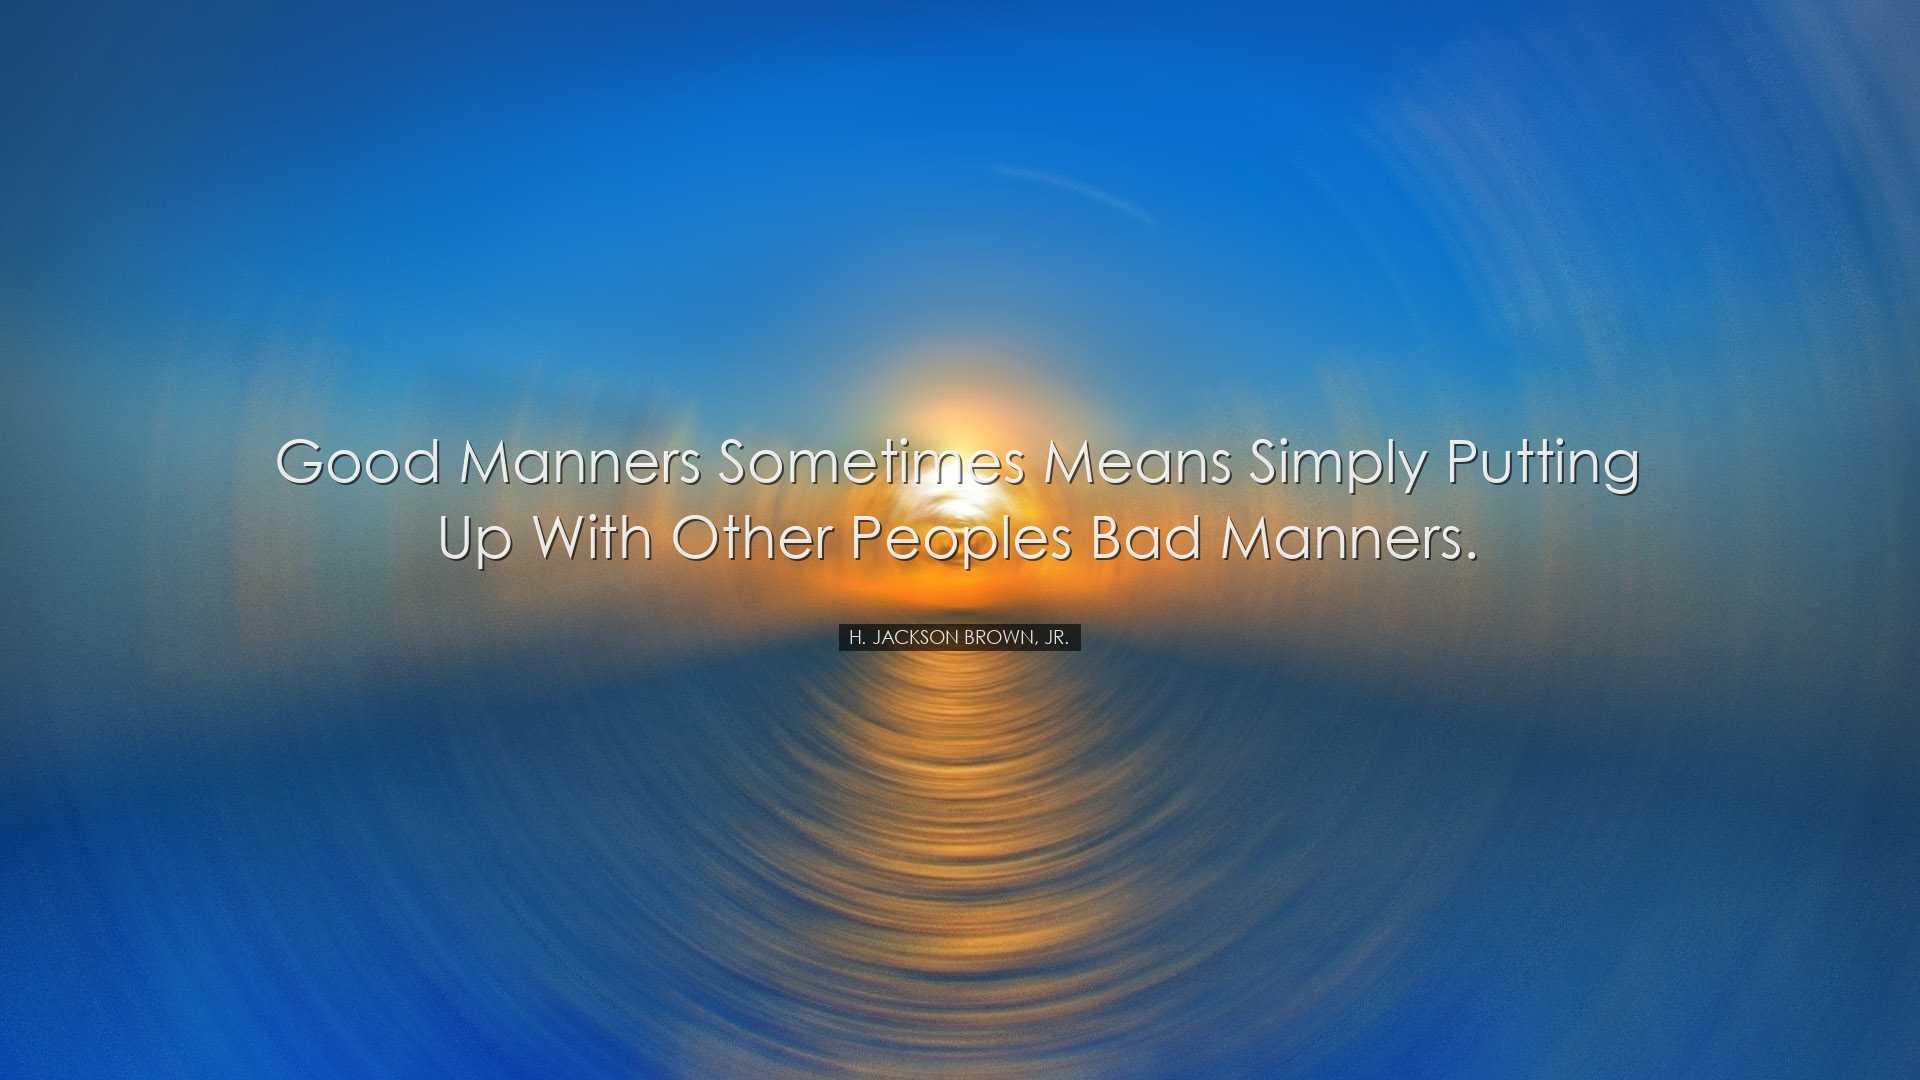 Good manners sometimes means simply putting up with other peoples